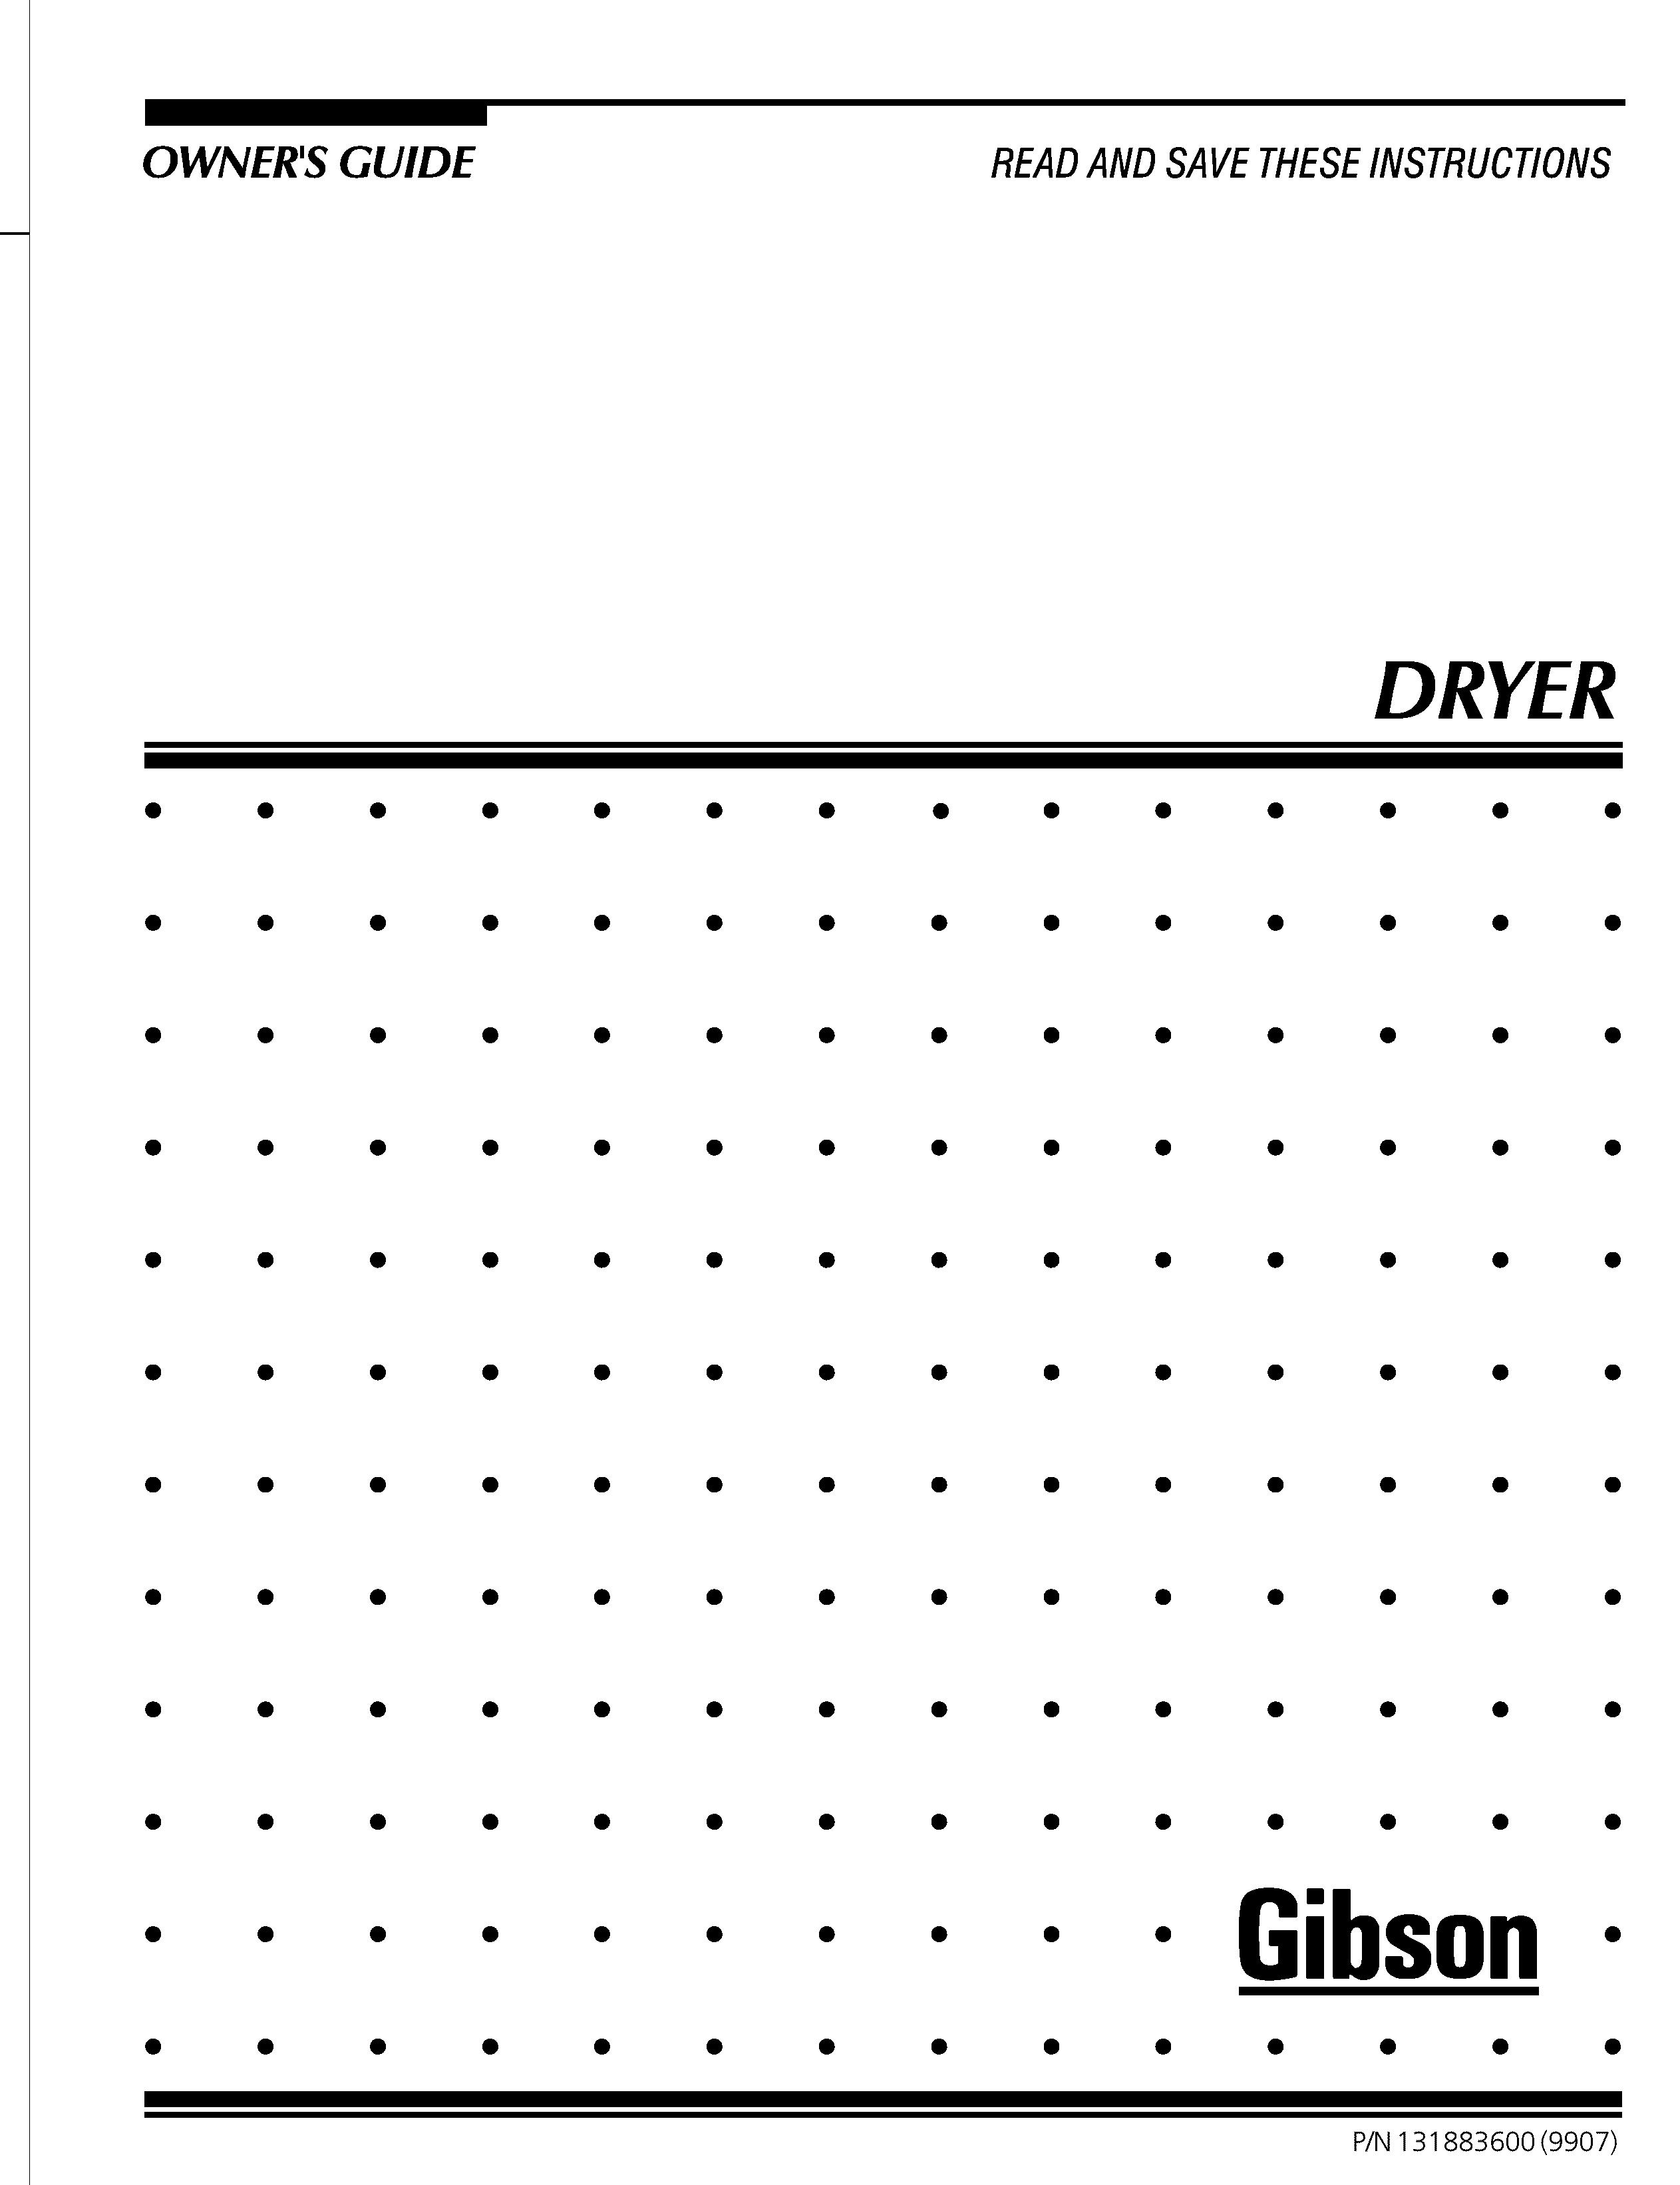 Electrolux - Gibson P/N 131883600 (9907) Clothes Dryer User Manual